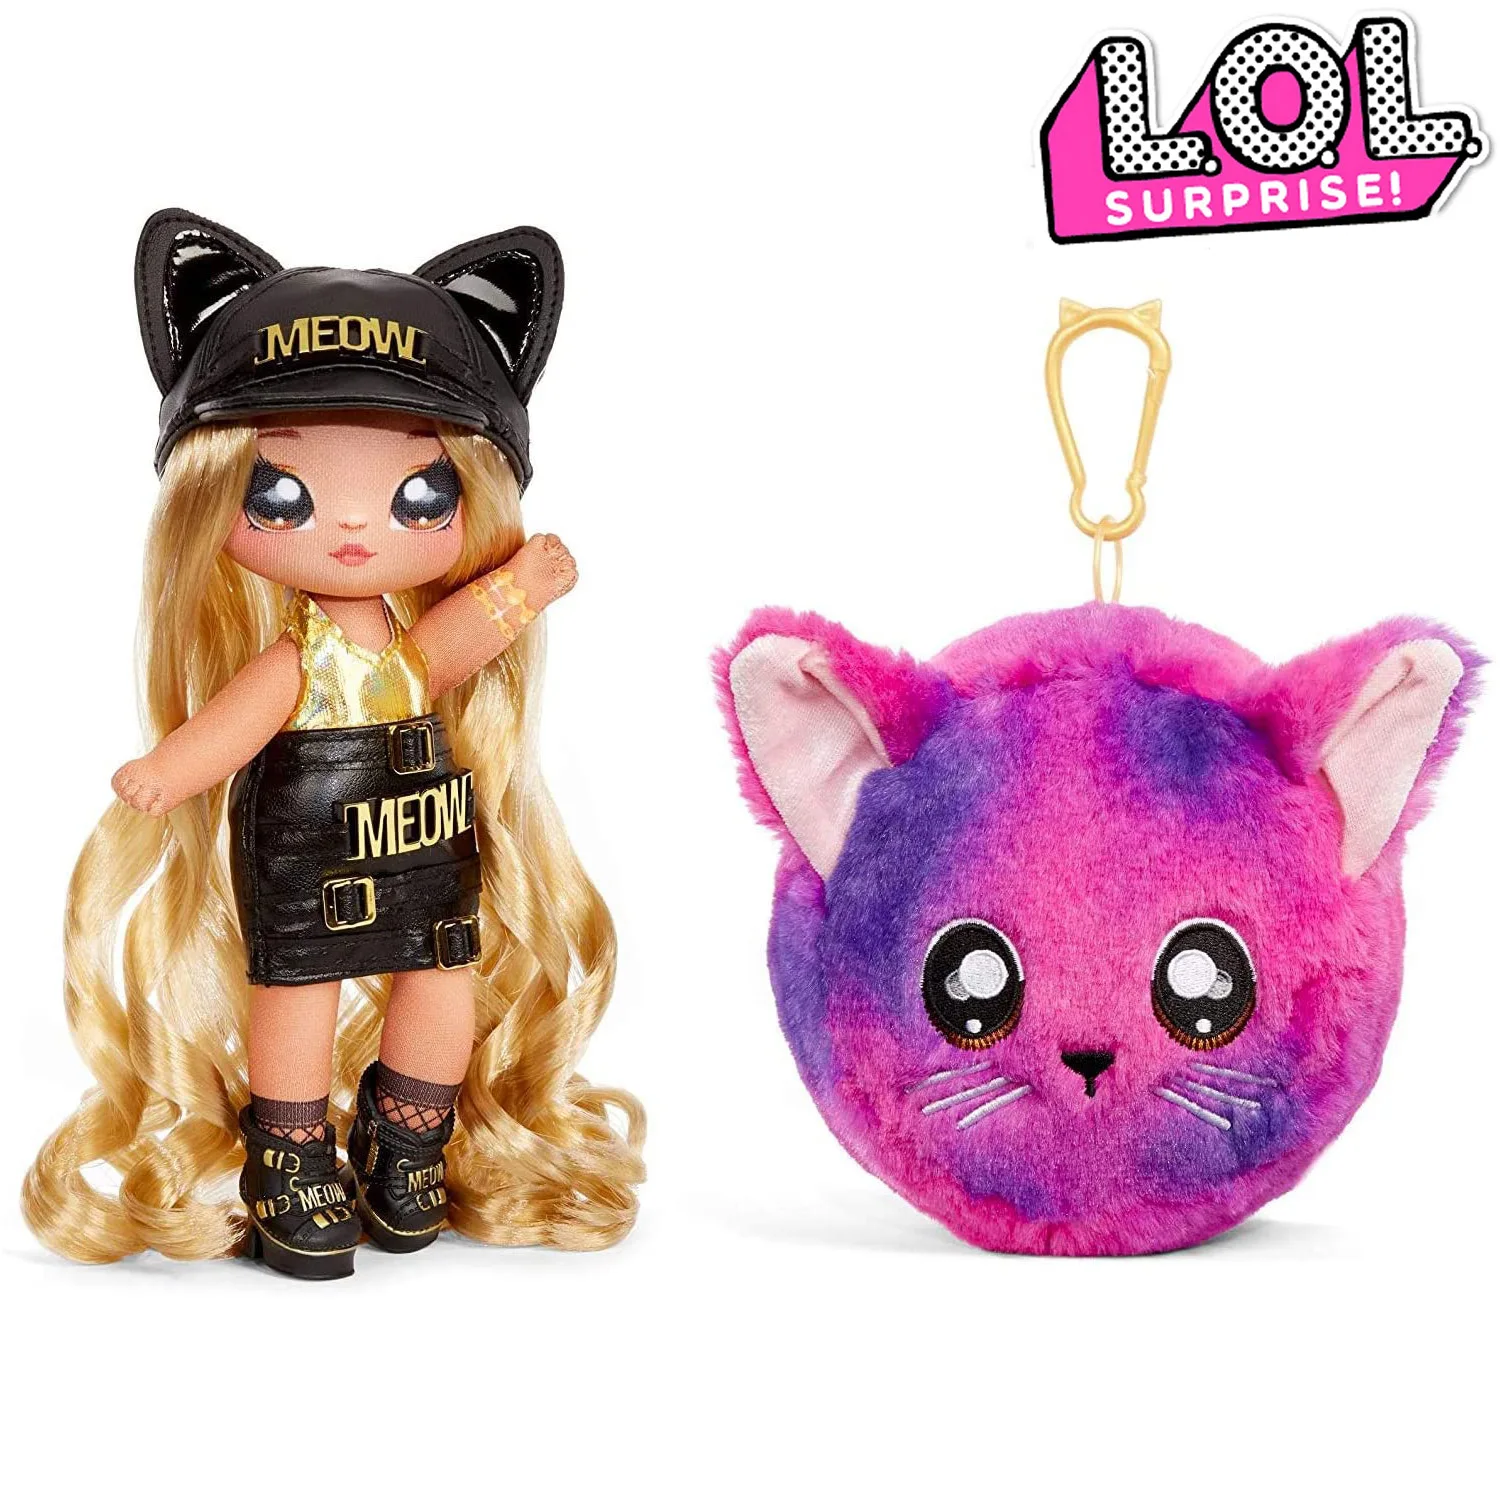 

NEW Lol Dolls MGA Entertainment Na! Na! Na! Surprise 2-In-1 Sasha Scratch Fashion Doll Plush Toy Purse Series 3 Toys For Girls